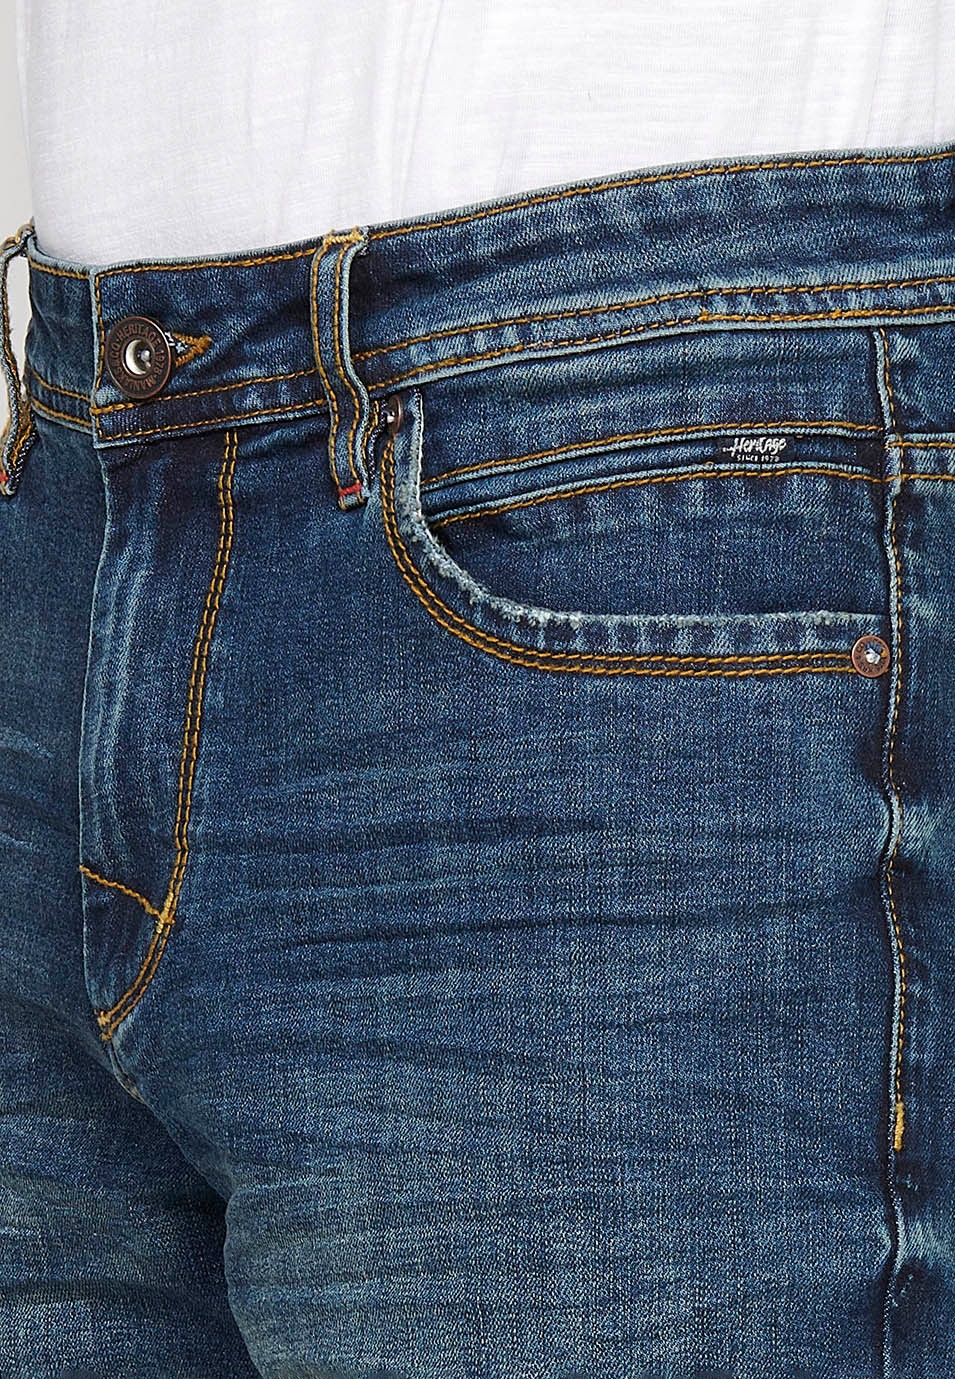 Bermuda denim shorts with front zipper and button closure with five pockets, one blue pocket pocket for Men 7